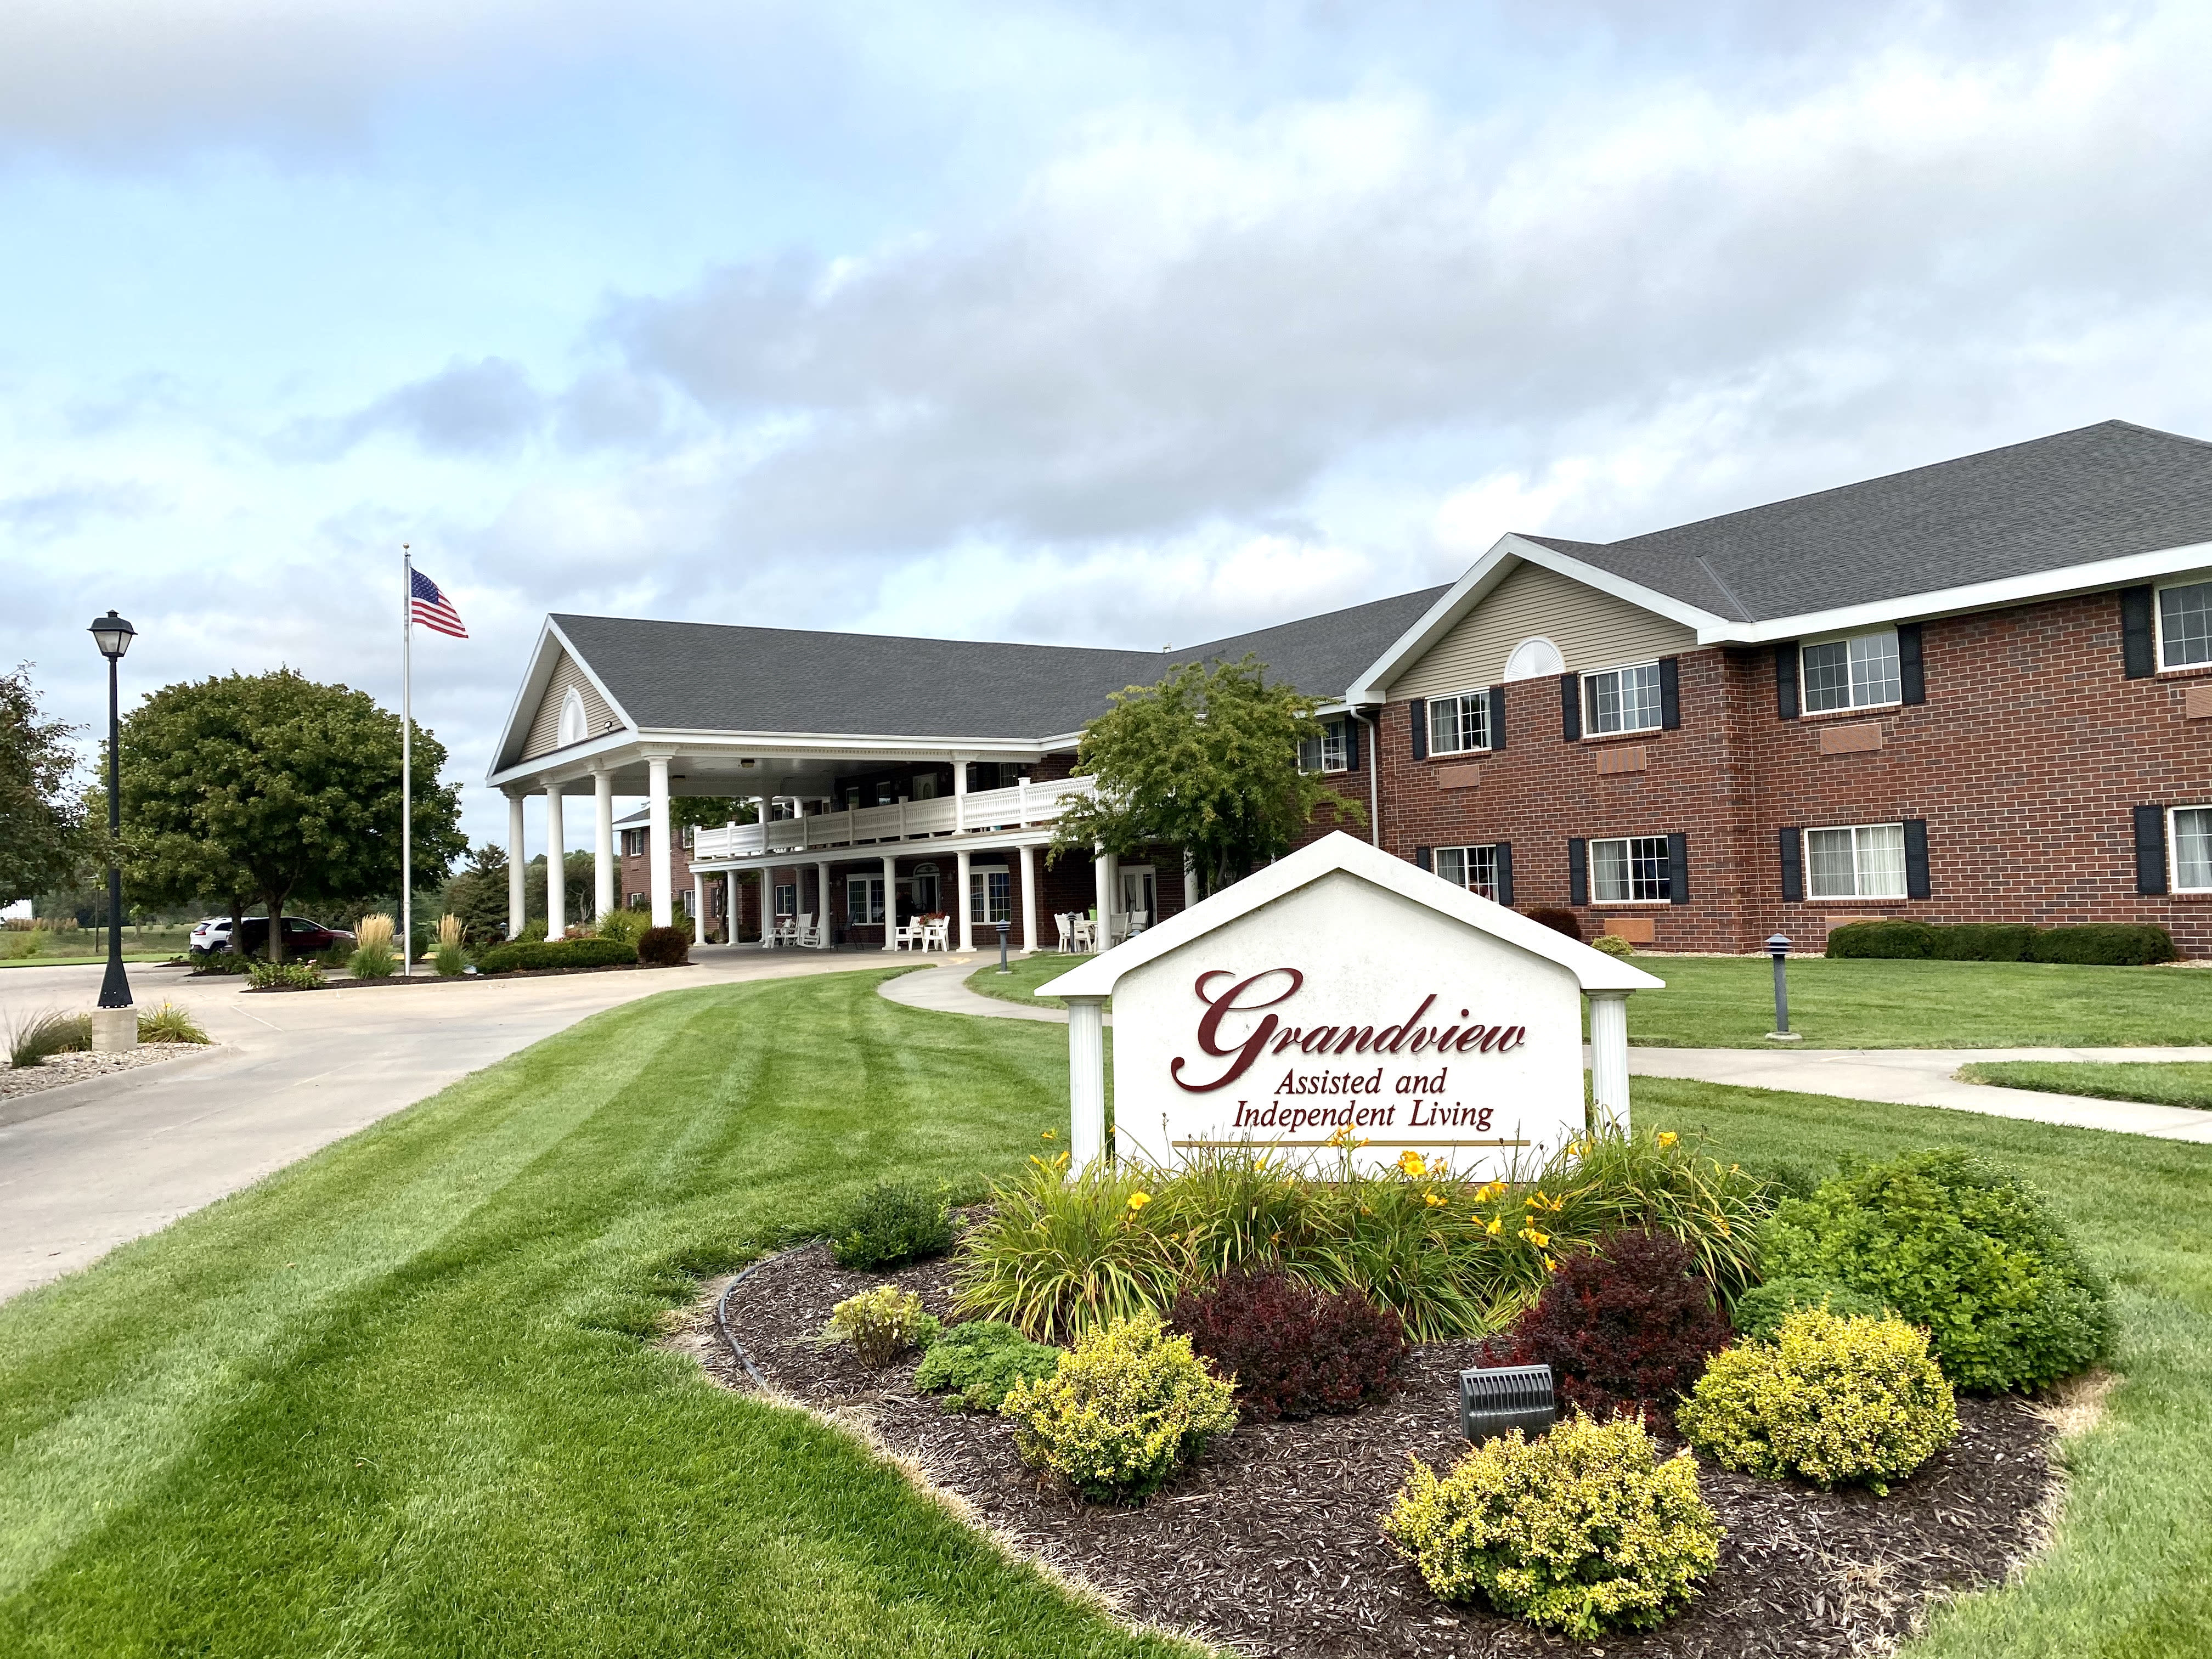 Grandview Assisted and Independent Living 